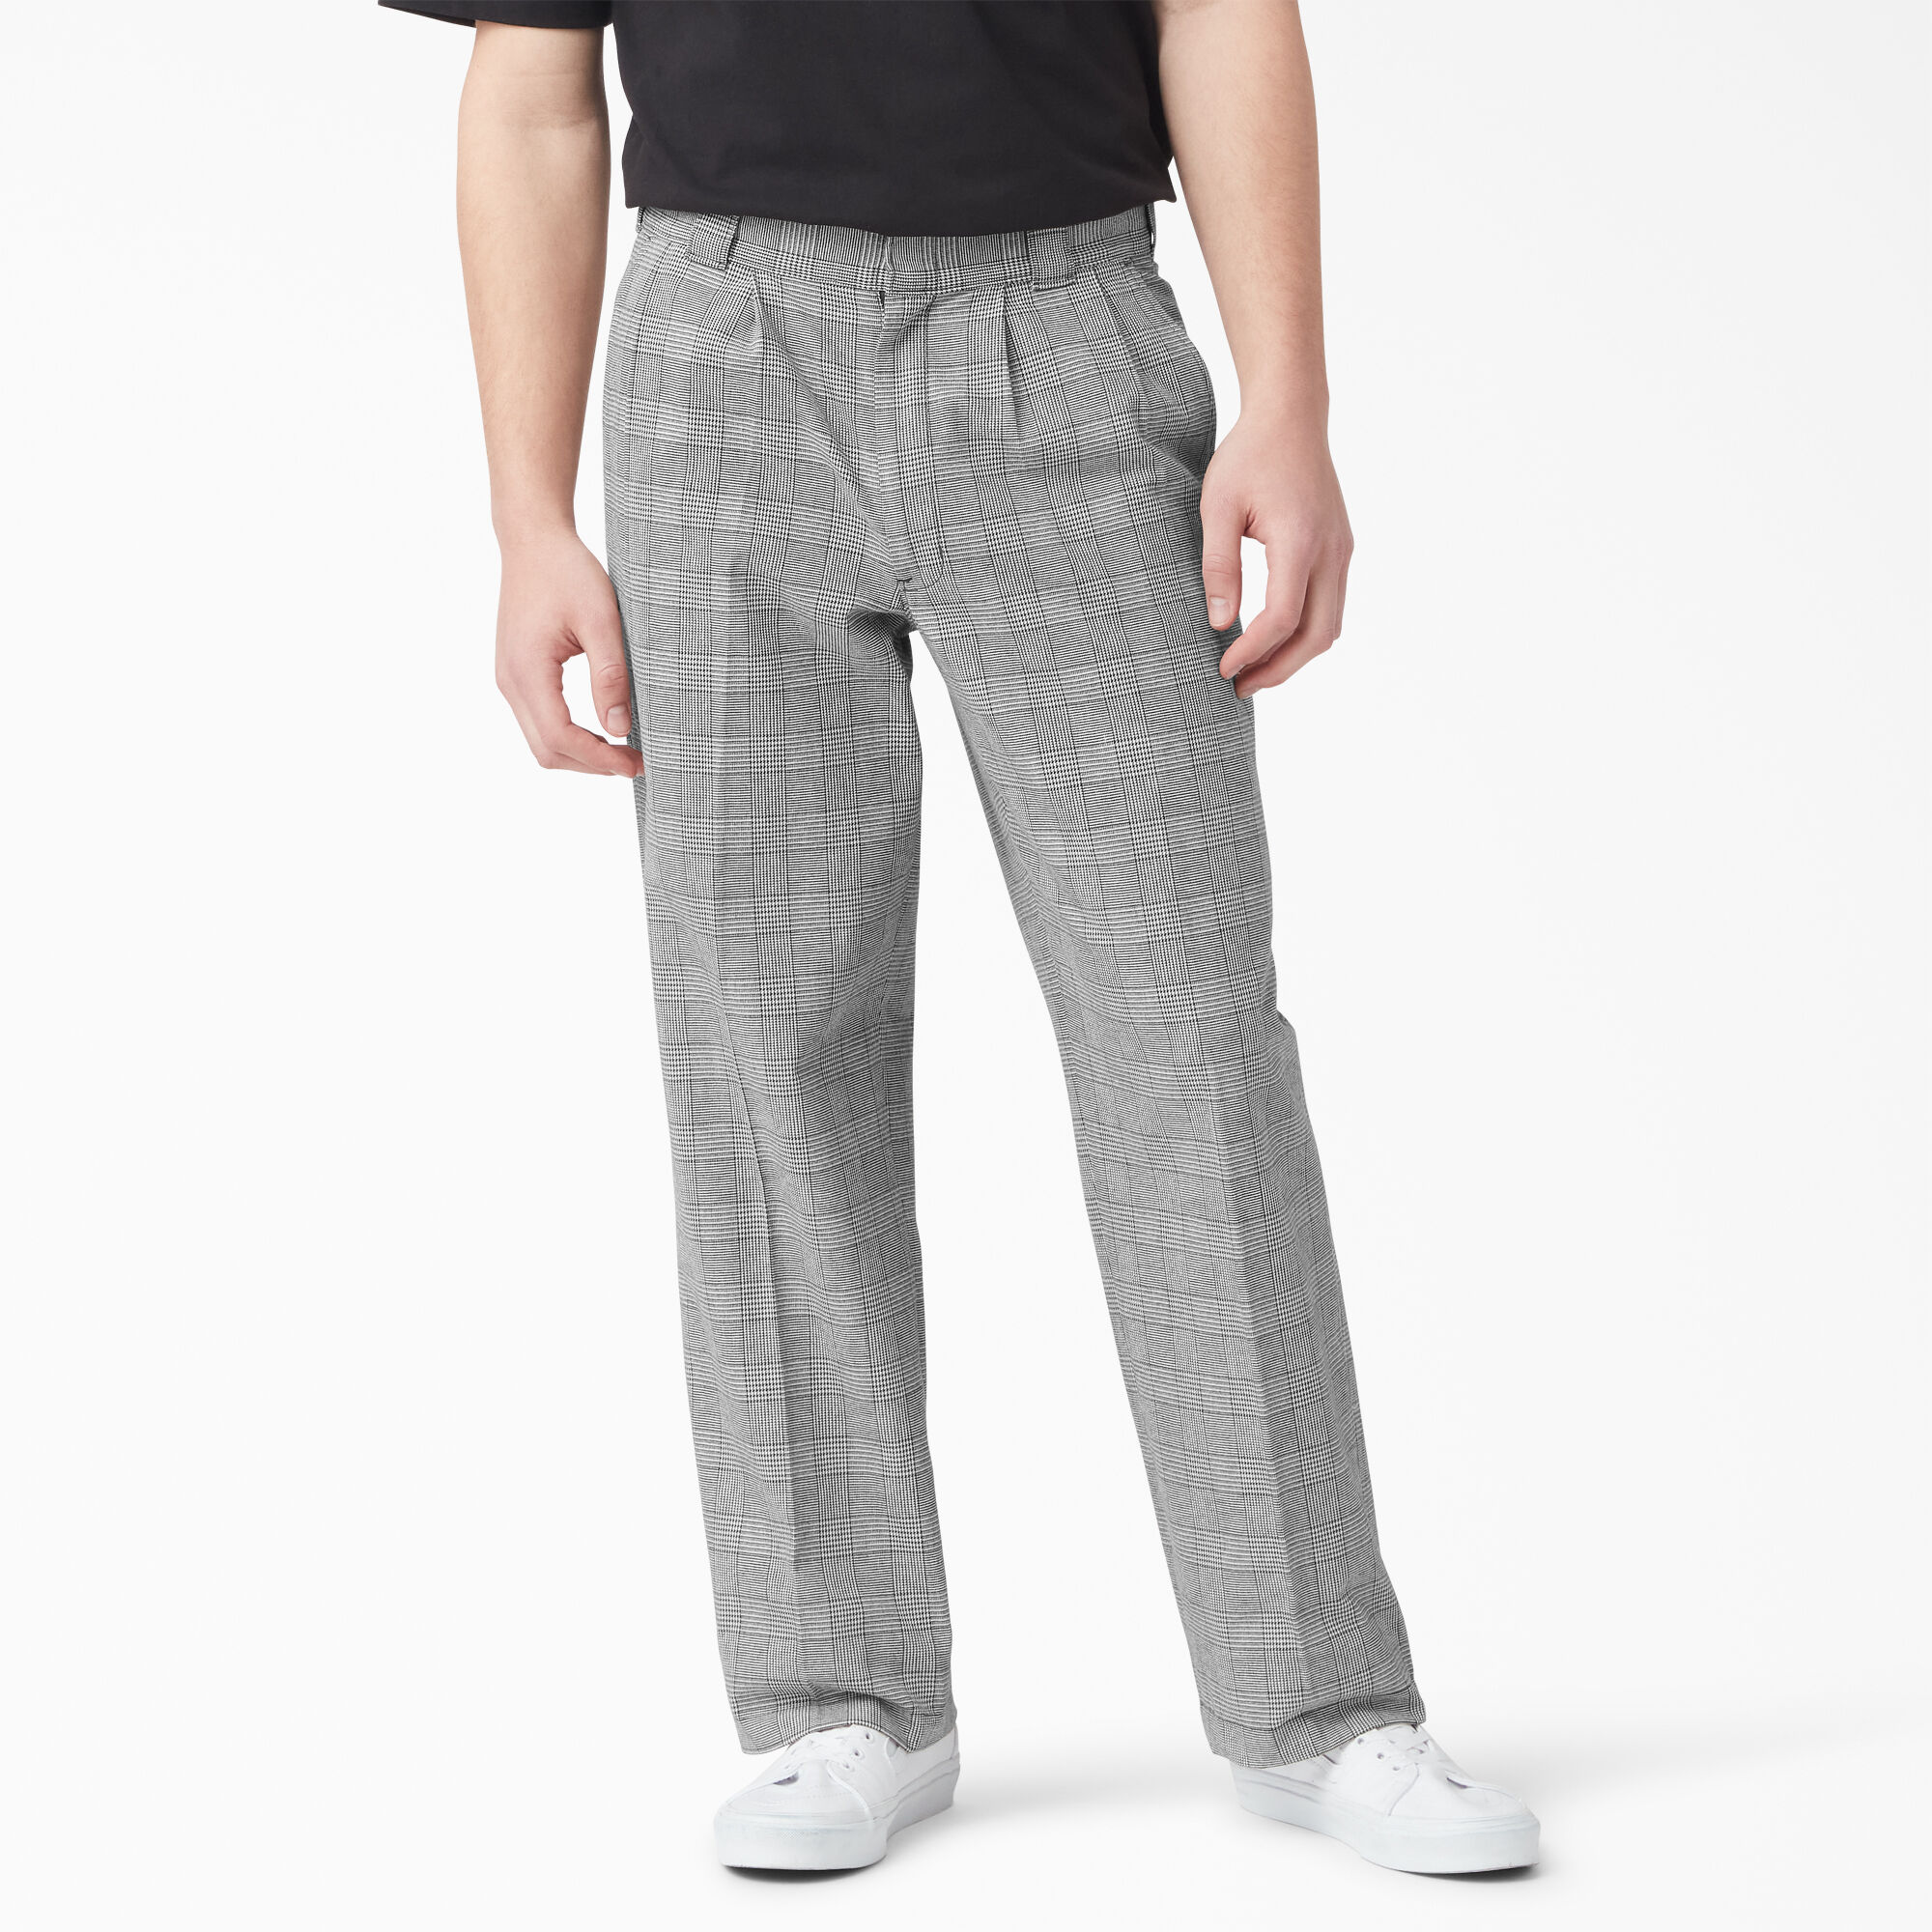 Bakerhill Relaxed Fit Pants - Dickies US